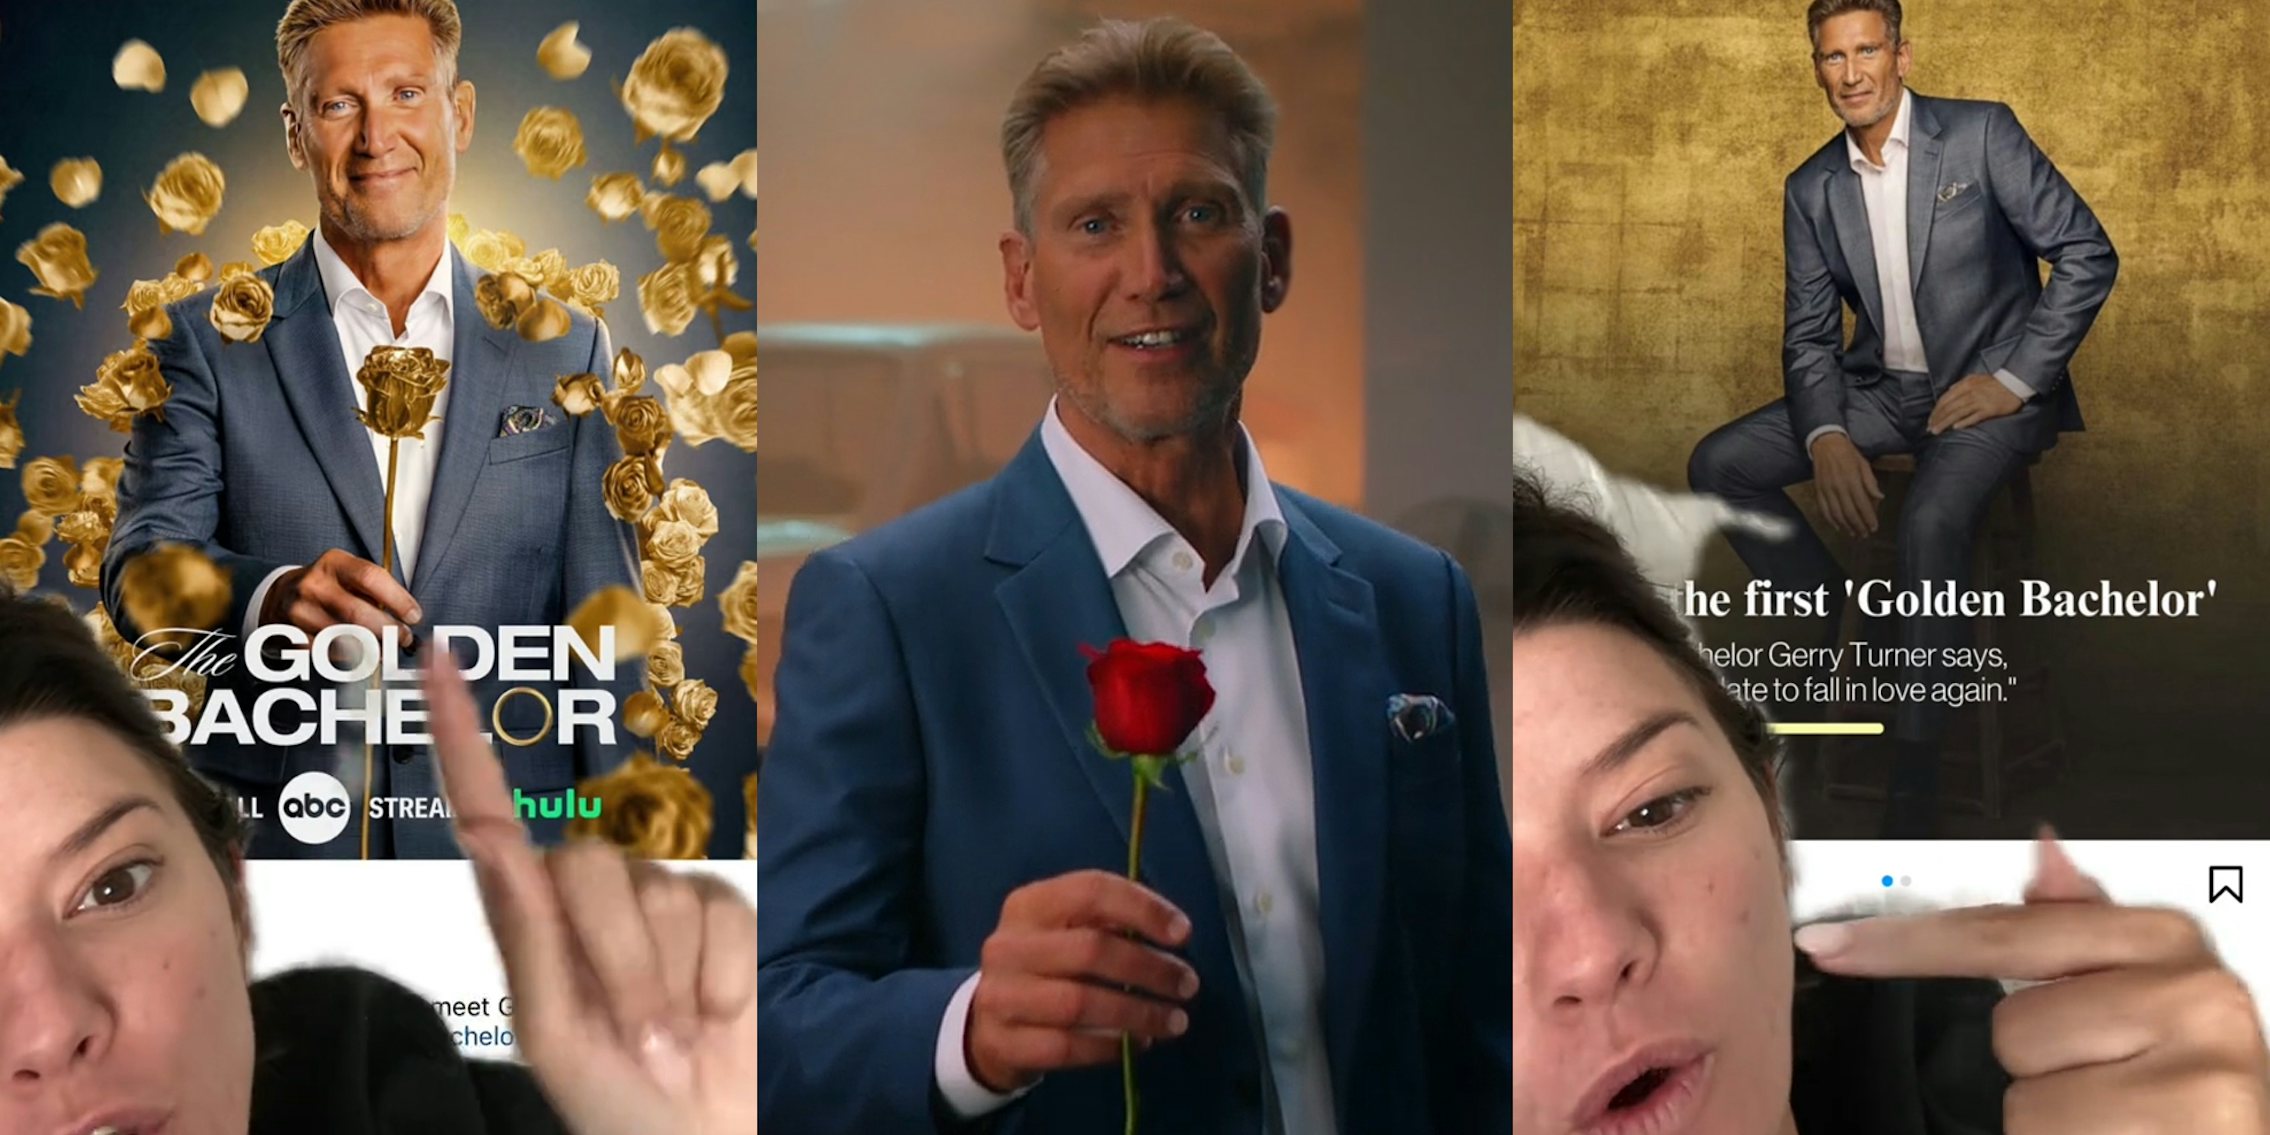 woman greenscreen TikTok over The Golden Bachelor Instagram post (l) The Golden Bachelor Gerry Turner standing with rose (c) woman greenscreen TikTok over The Golden Bachelor Instagram post (r)